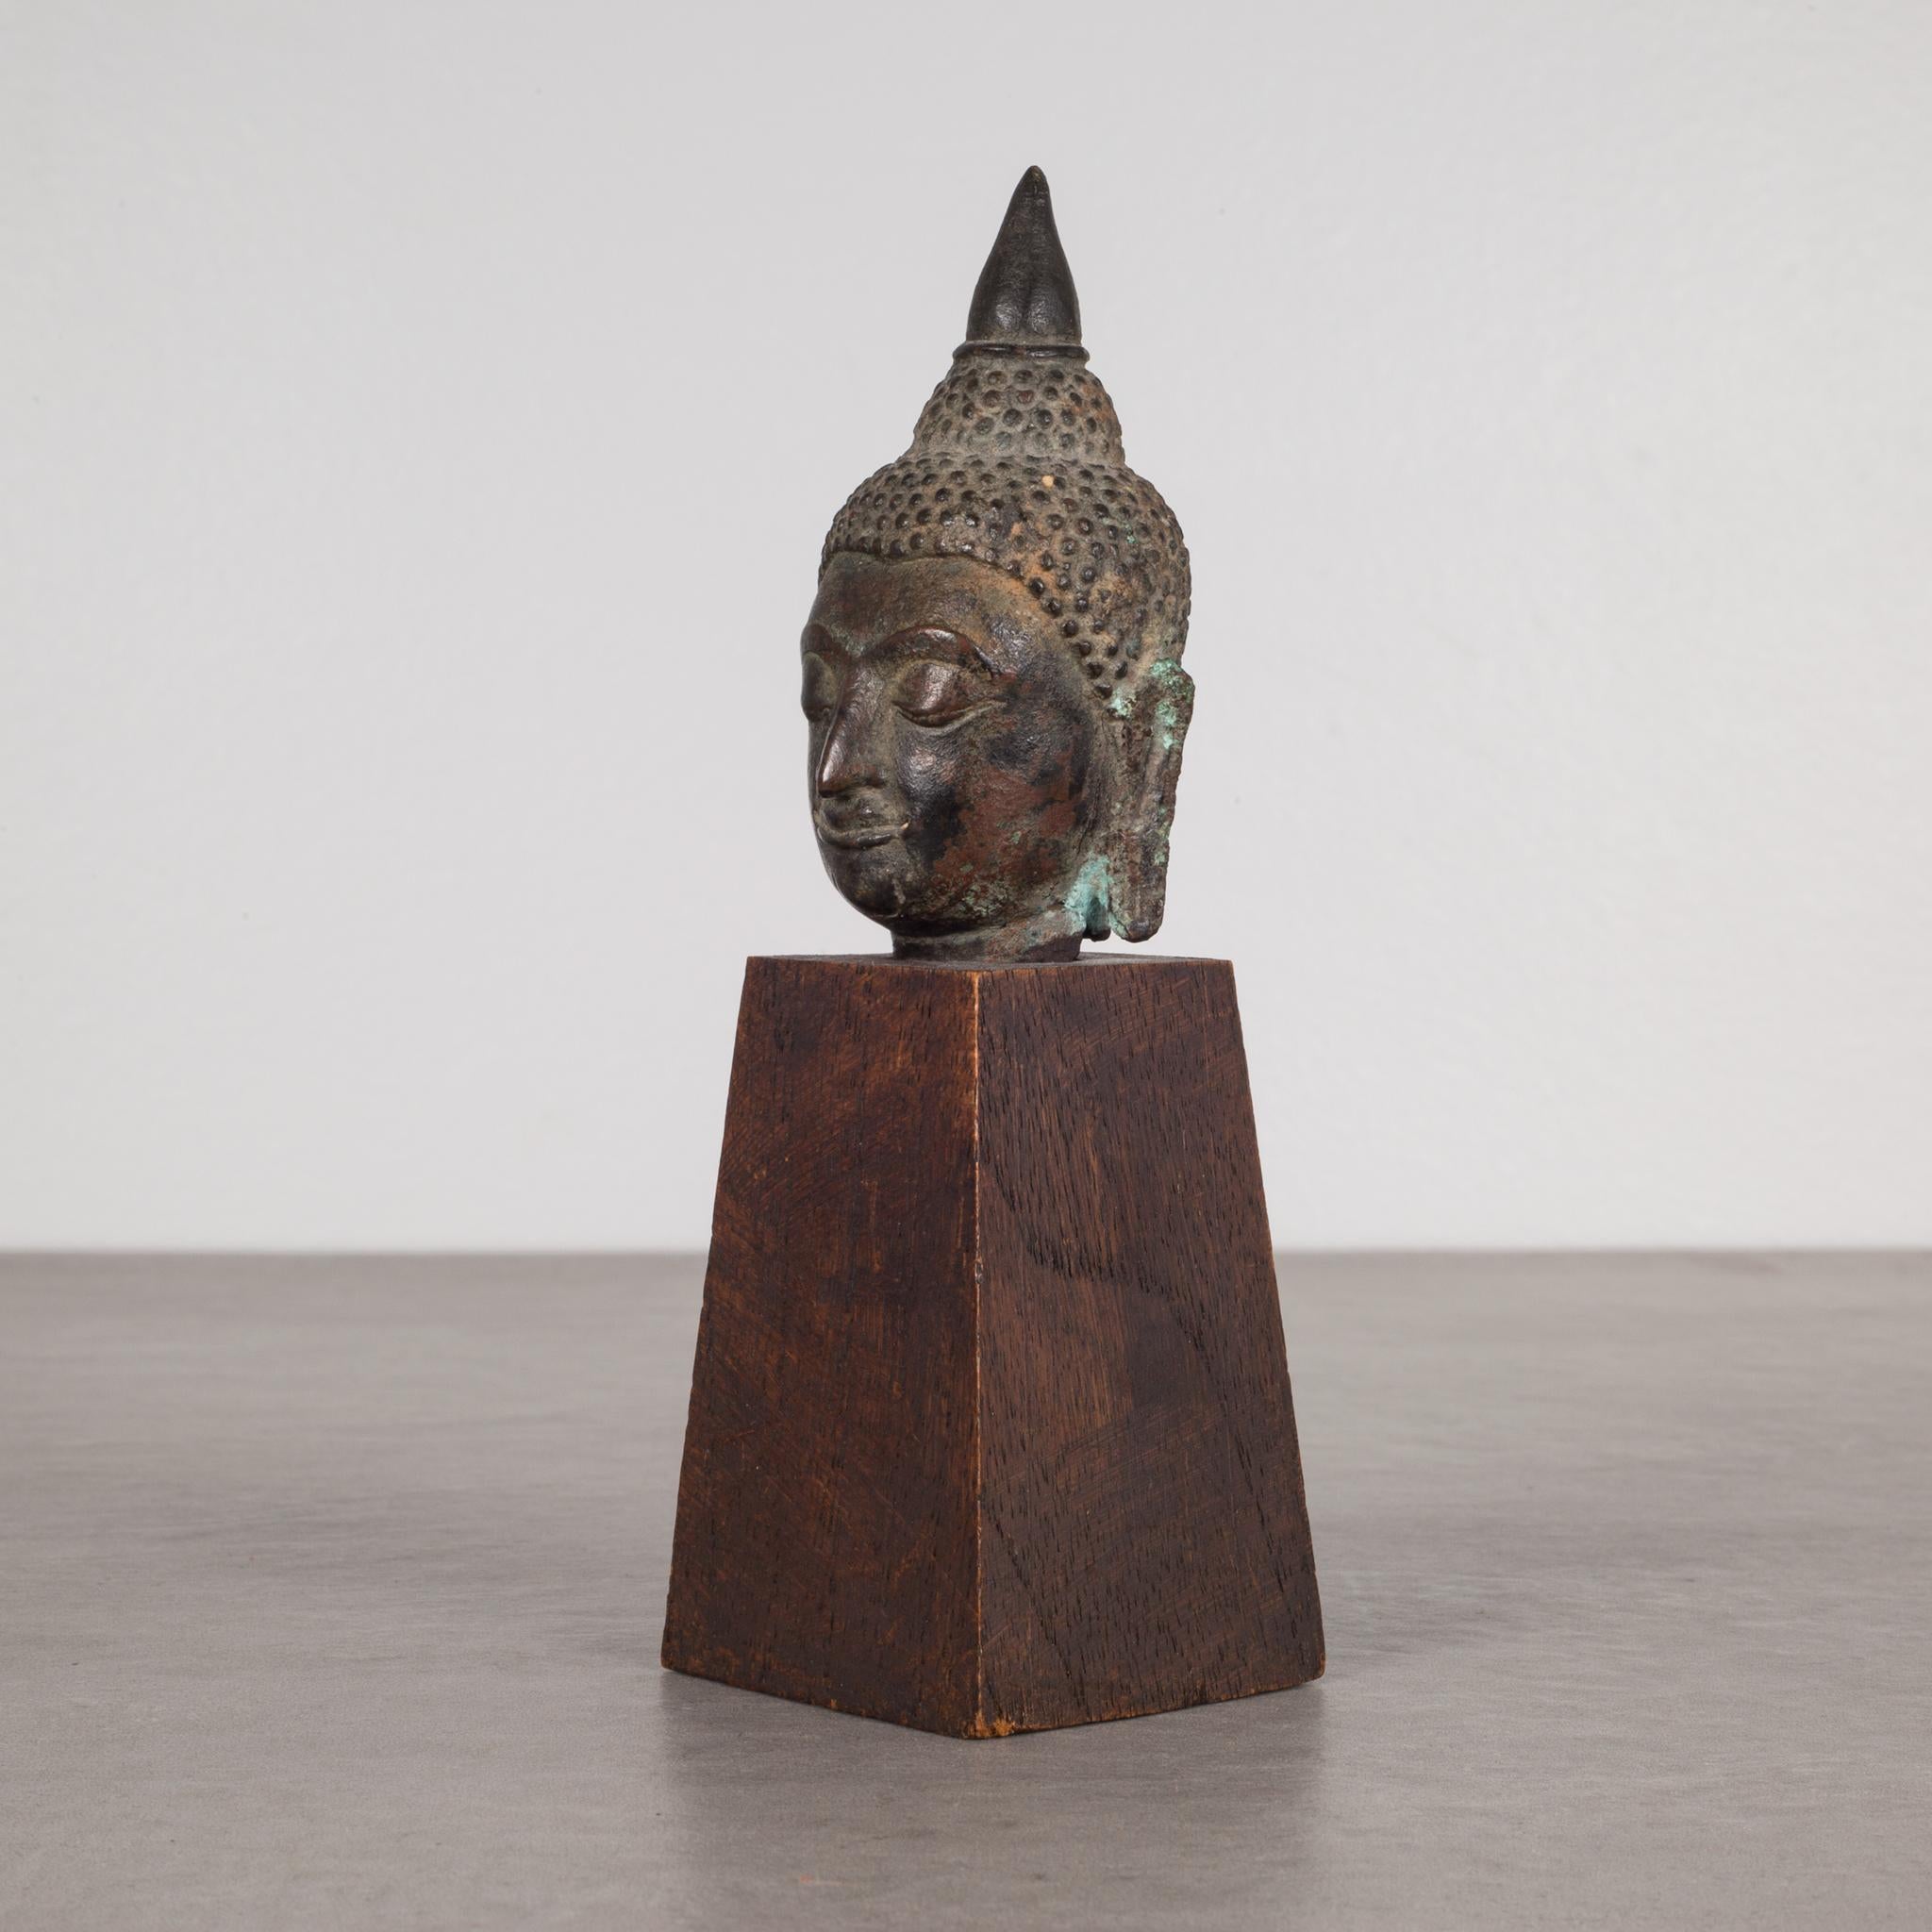 About

This is an original lost-wax casting bronze head of Buddah Shakyamuni from the 19th century, Thailand. It is mounted on a contemporary wood base. His meditative expression, arched eyebrows, downcast eyes, smiling lips, elongated earlobes and